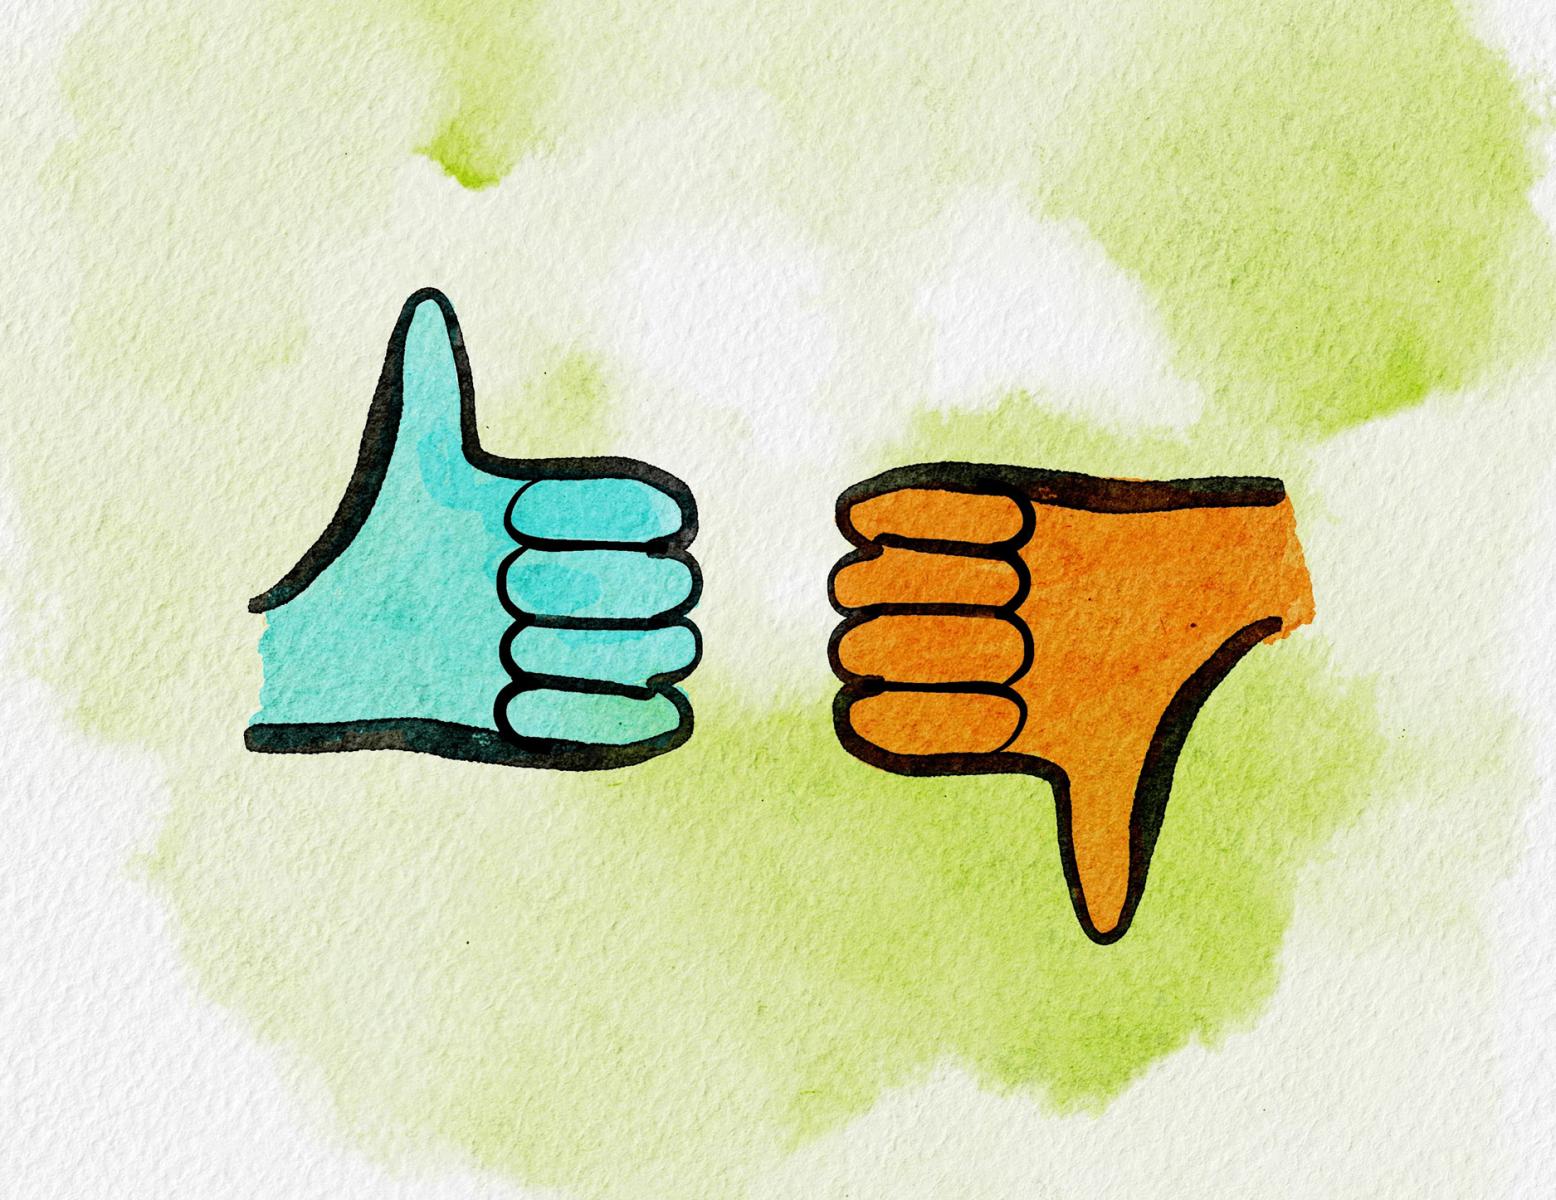 Thumbs up and down illustration